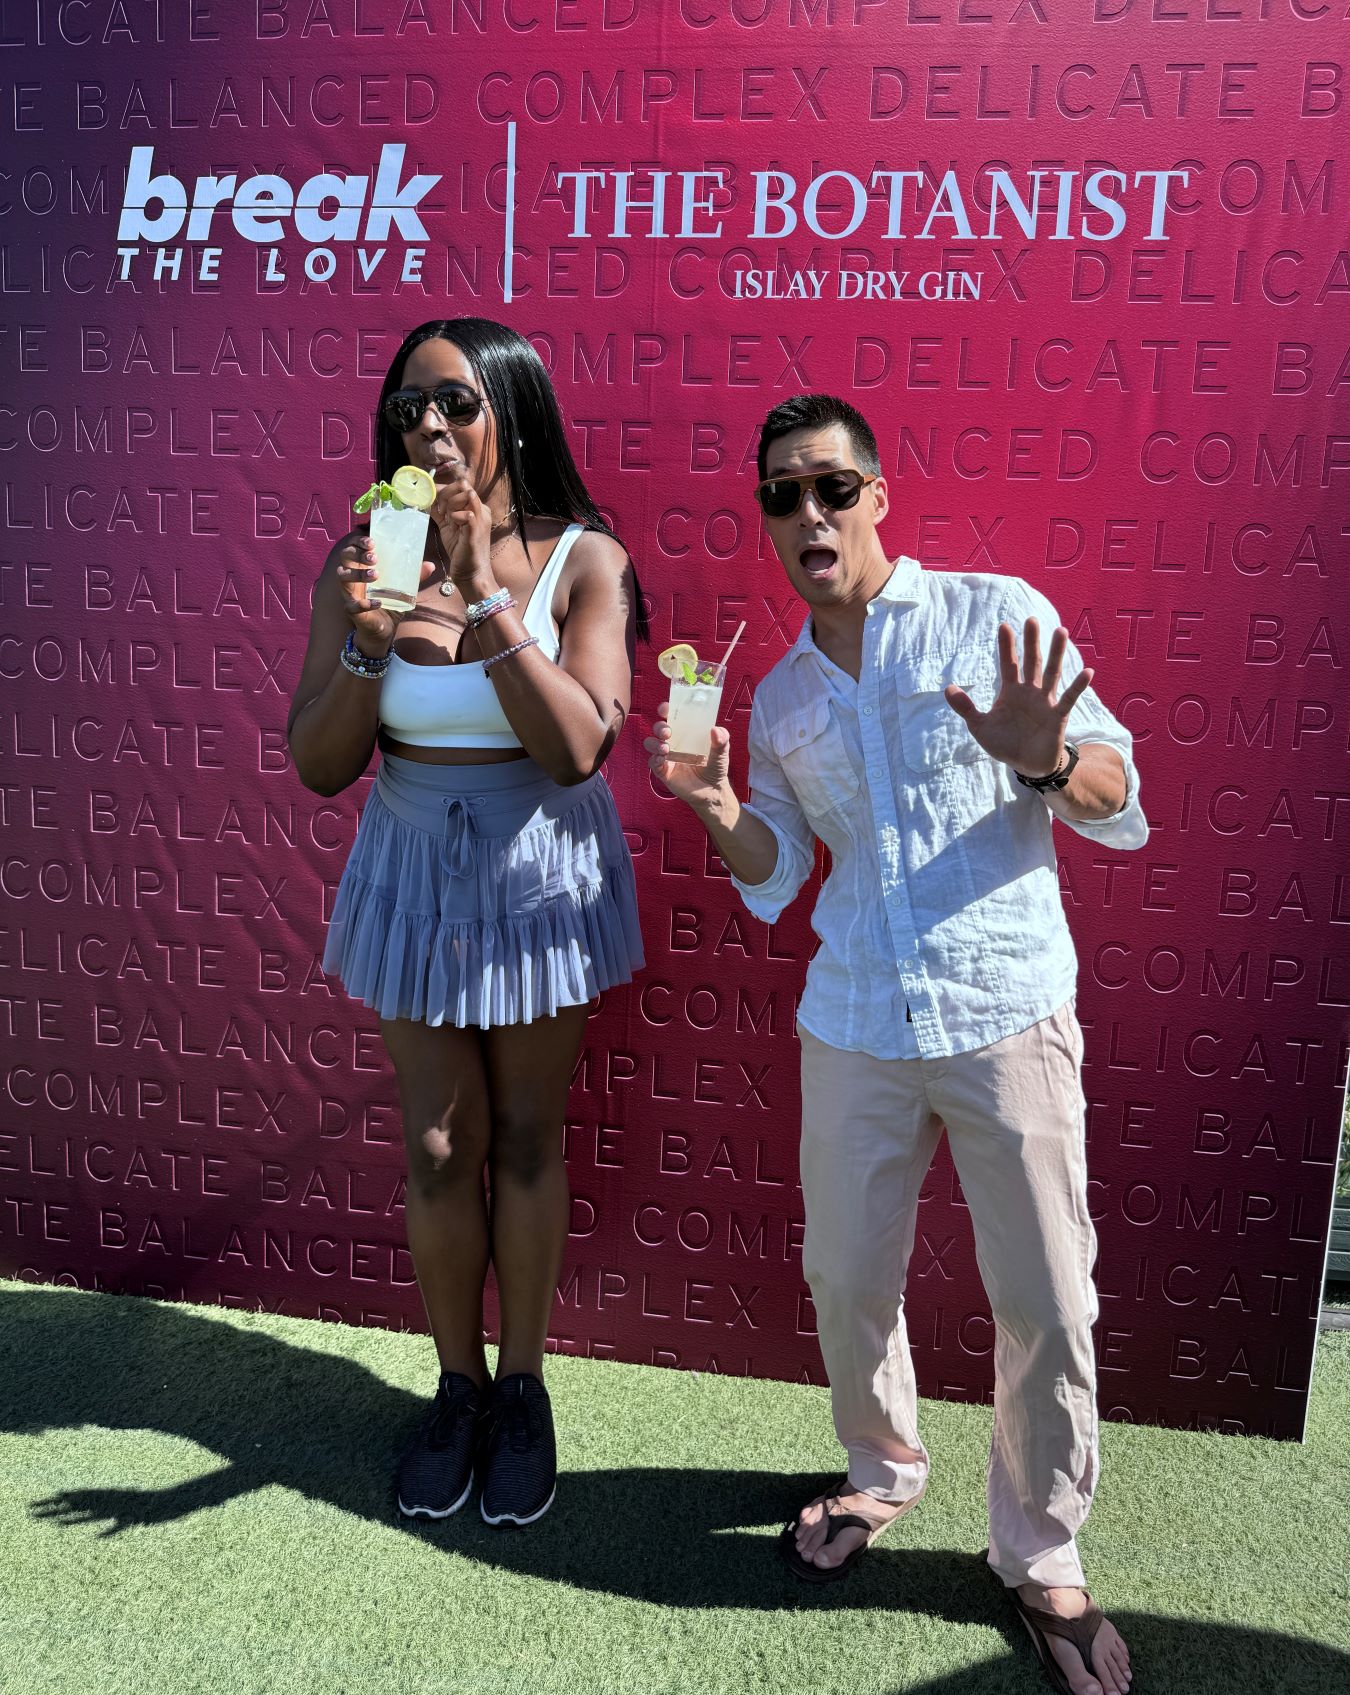 An image of Ariel and E-Kan at an event for The Botanist Gin and break the Love.